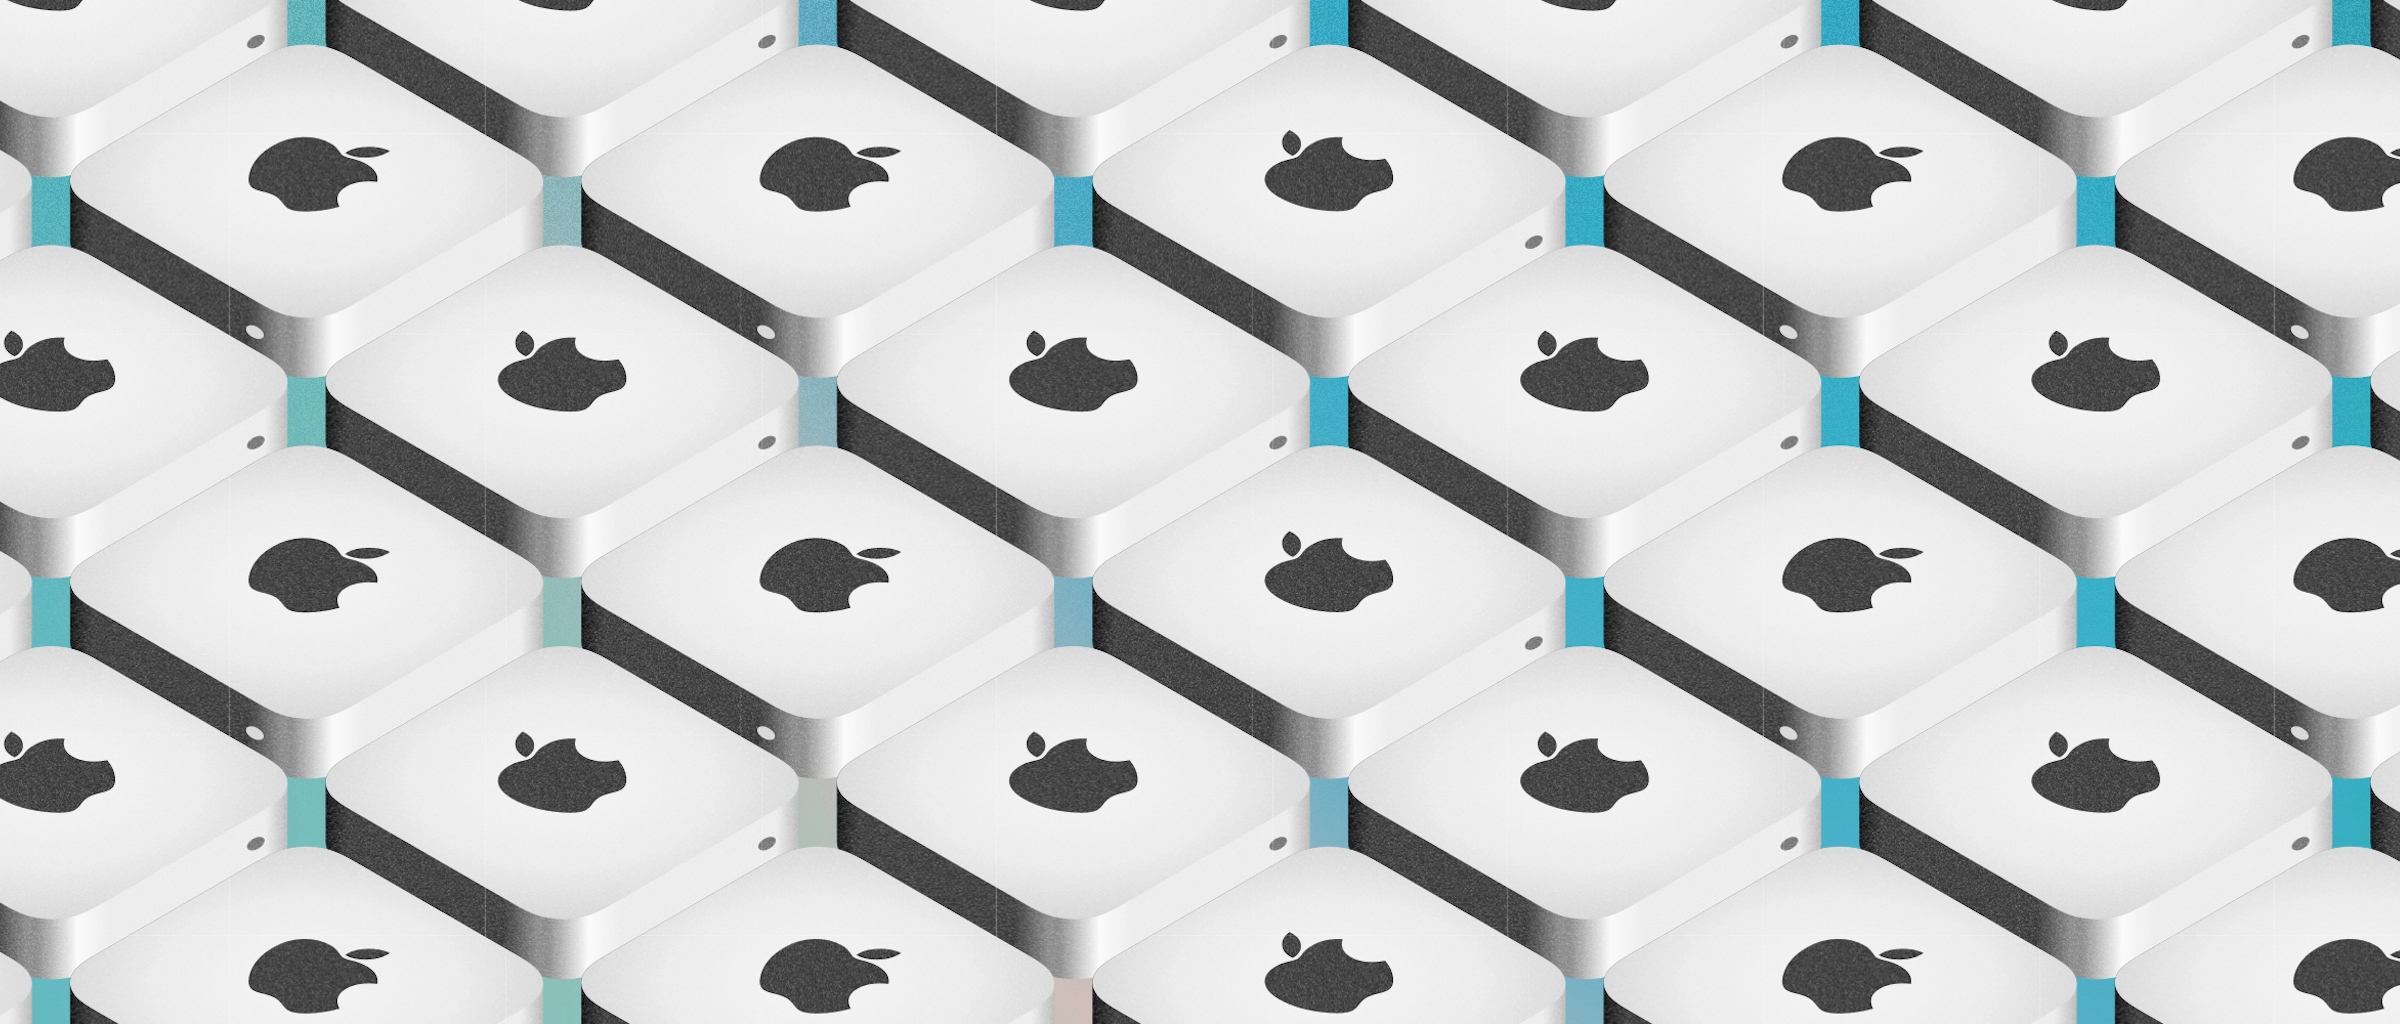 An image showing a series of illustrated Mac minis from an isometric viewpoint